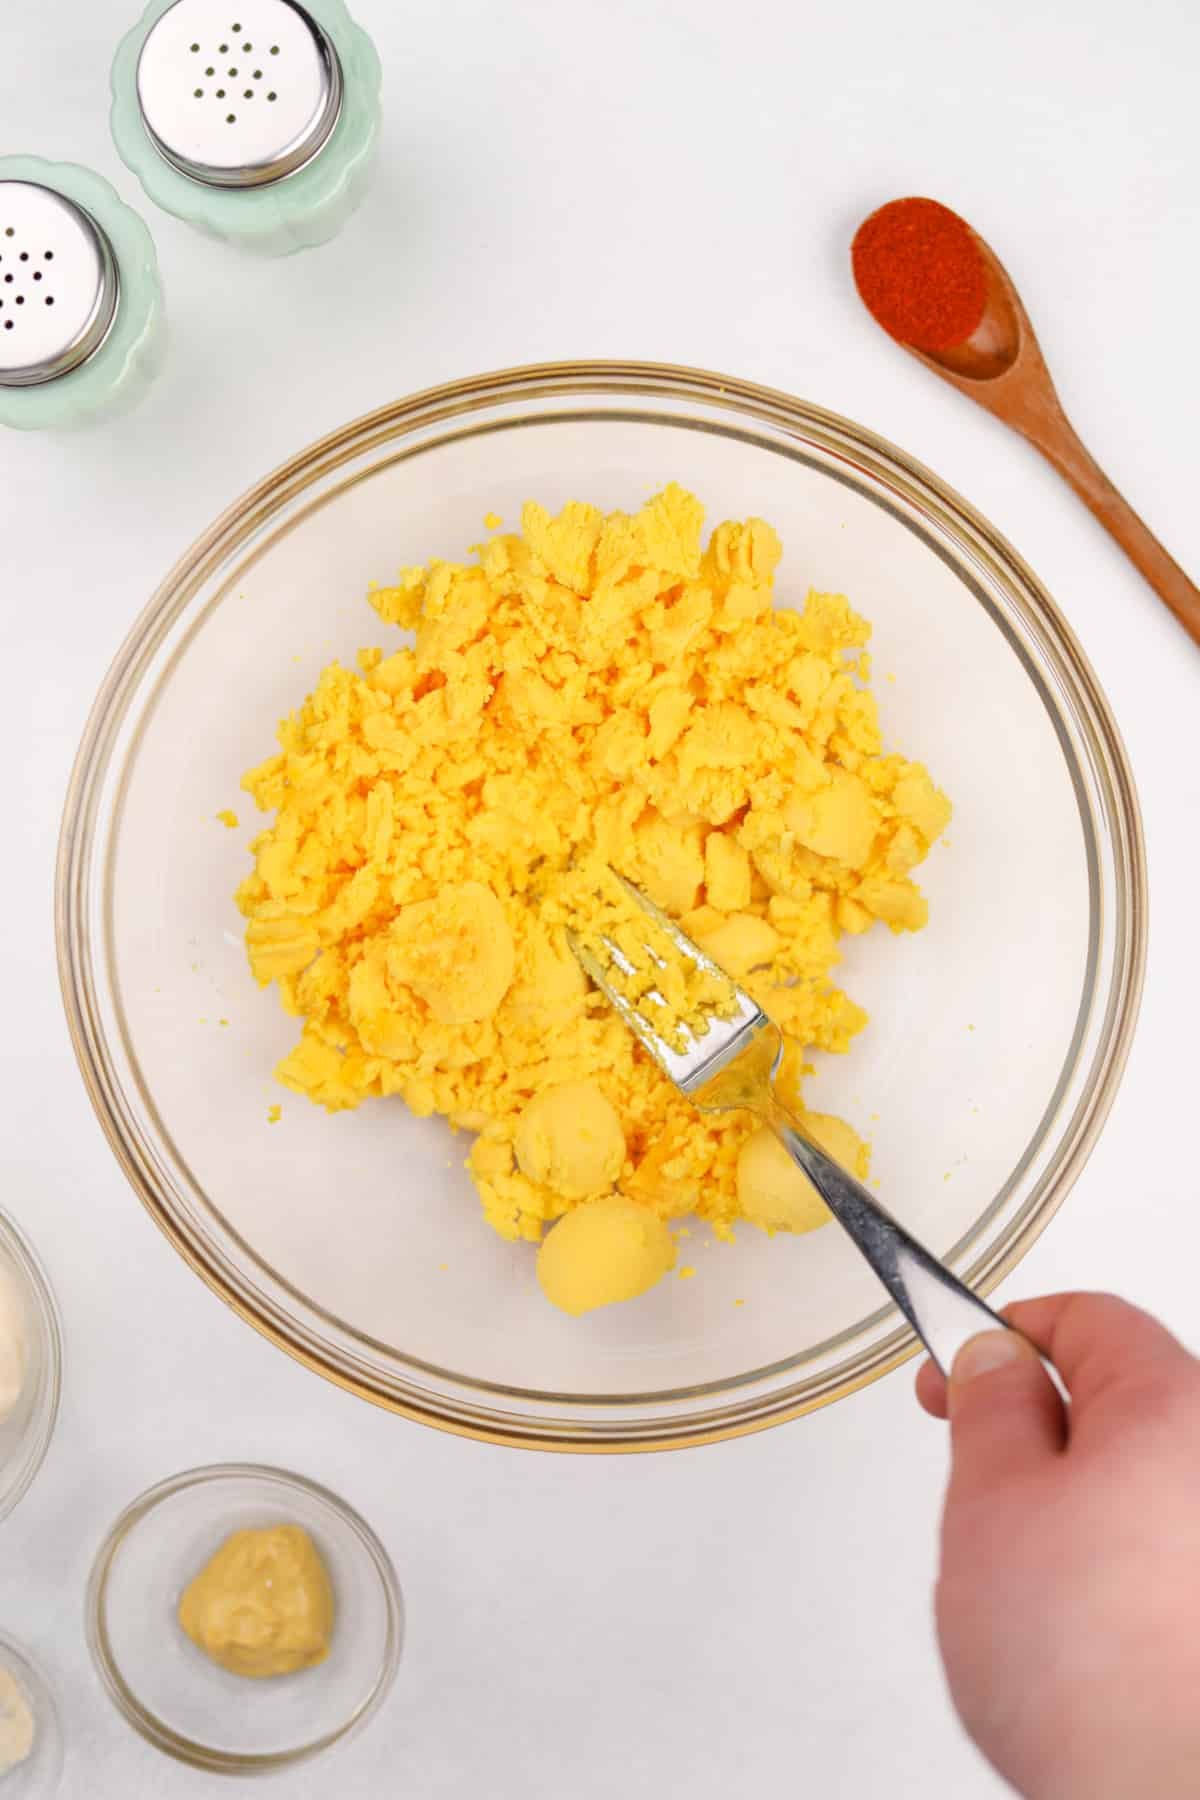 Mashing cooked egg yolks in a bowl with a fork.